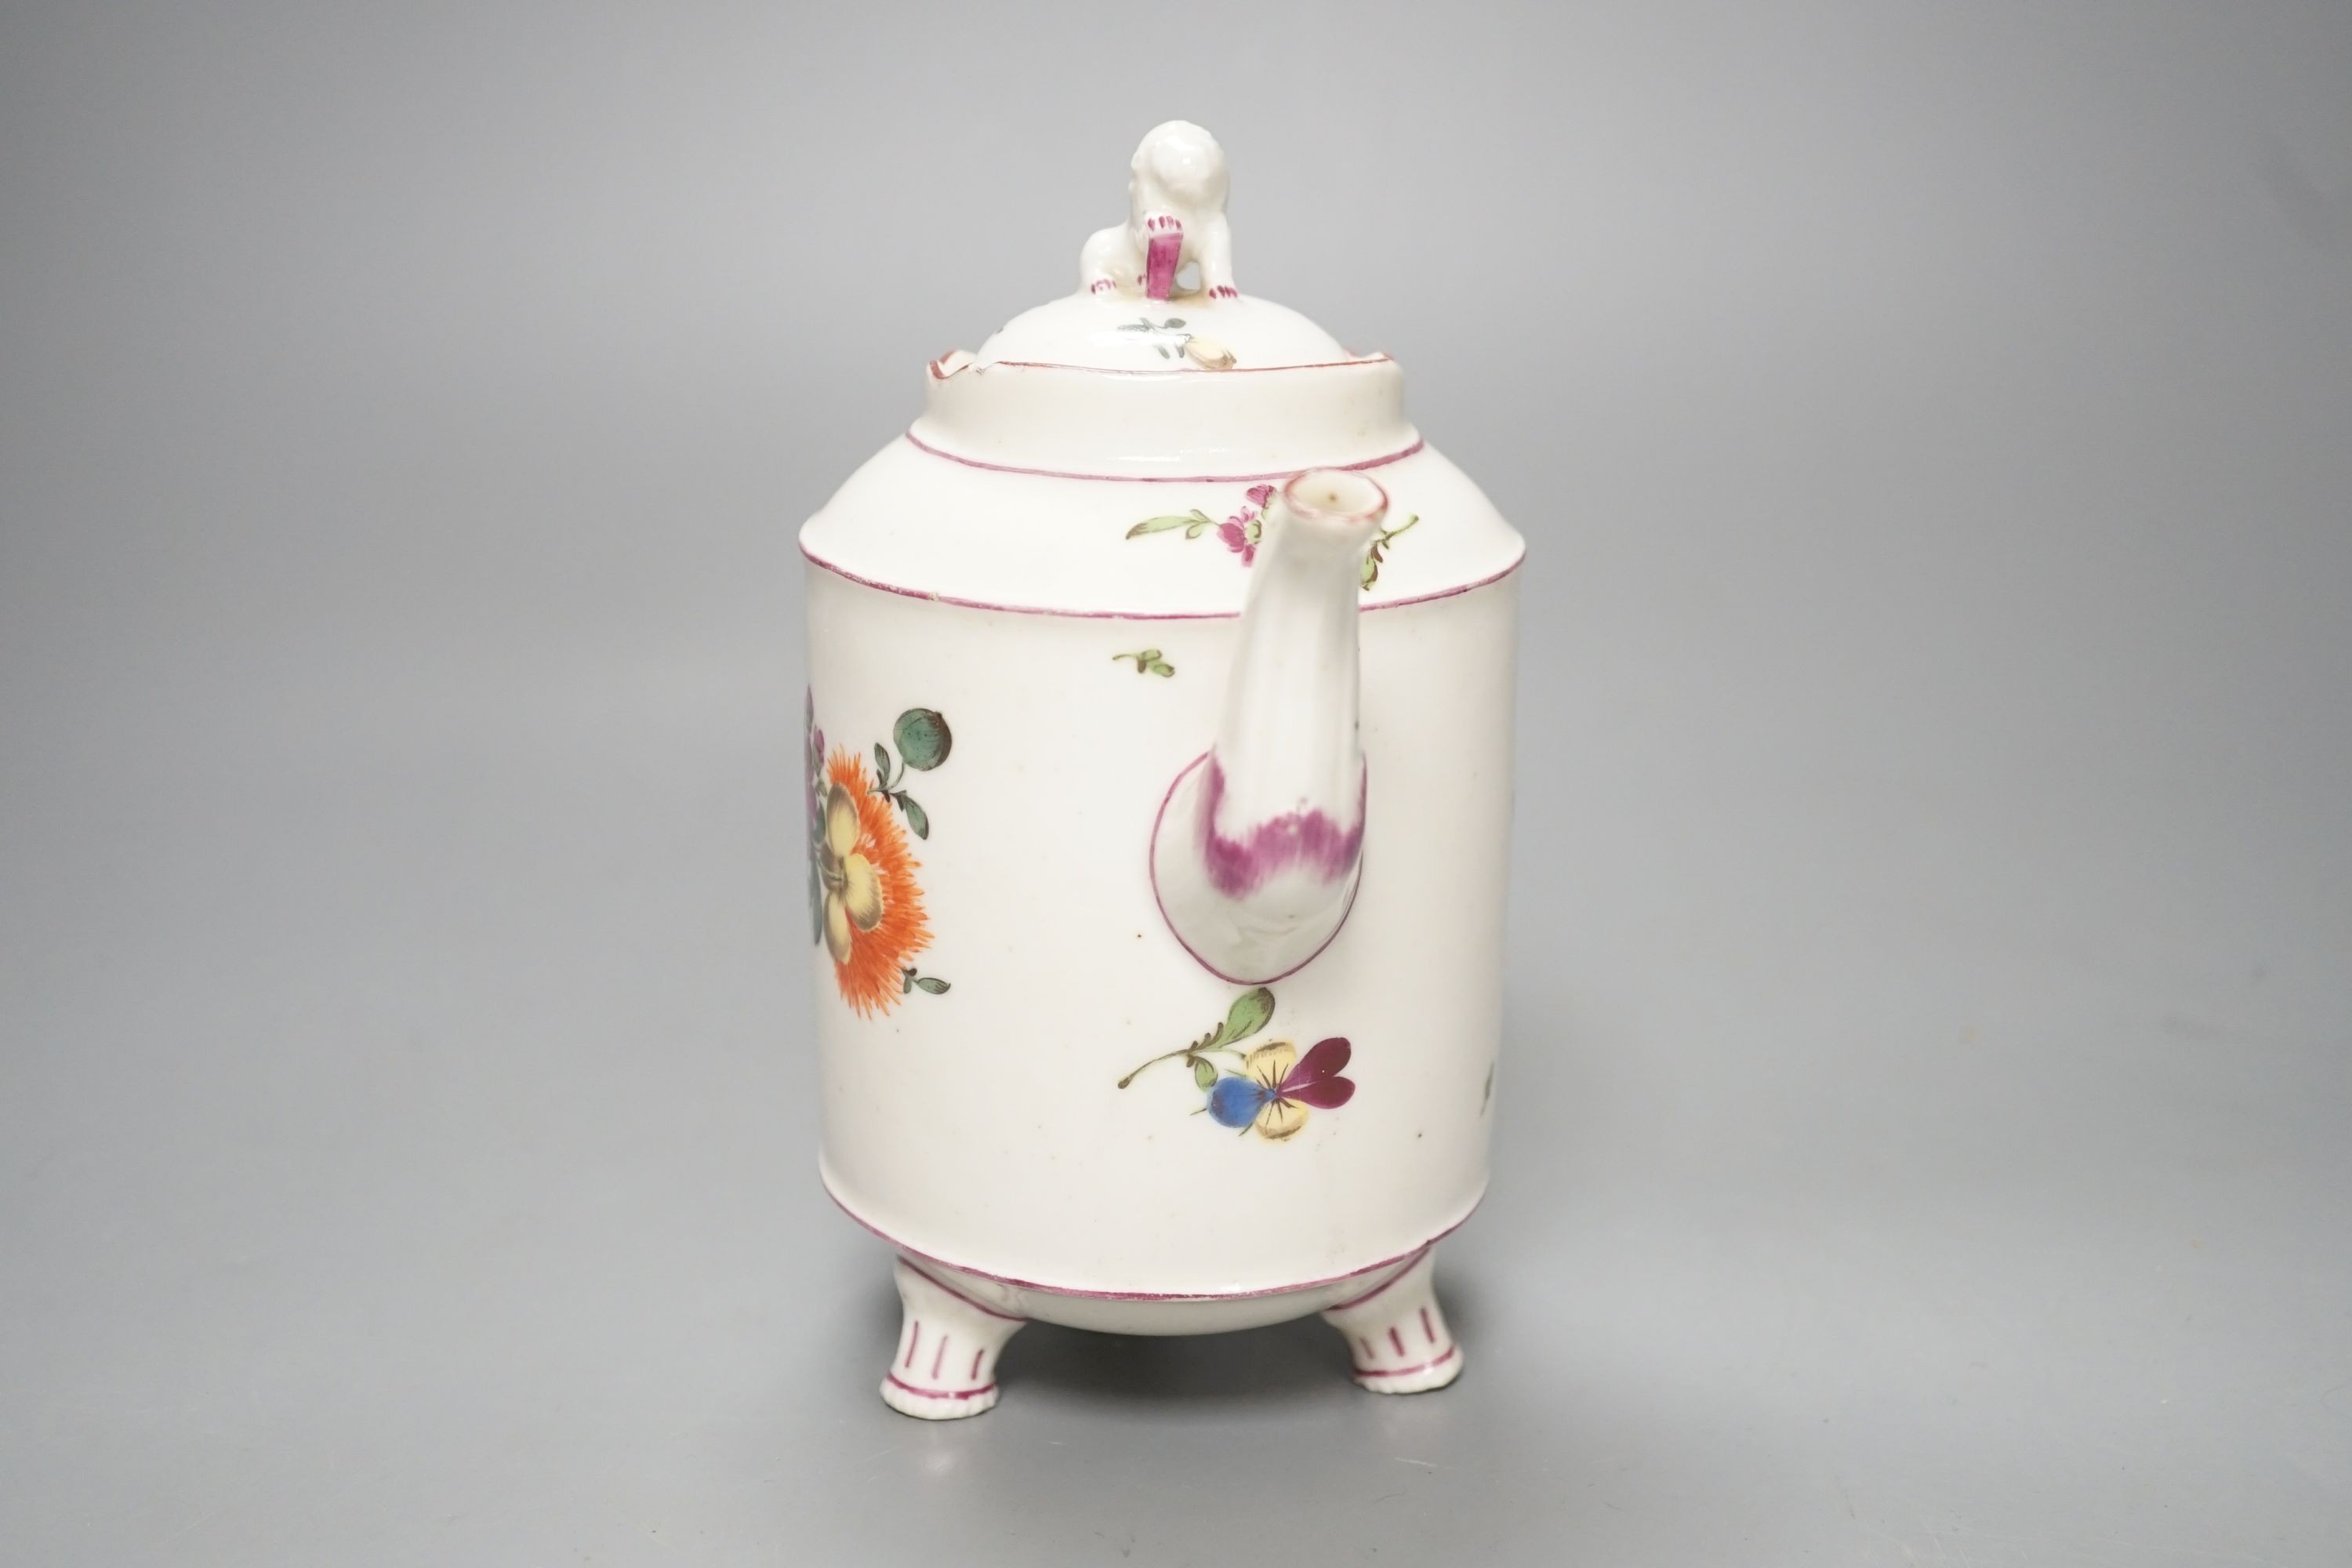 An 18th century Ludwigsburg three footed teapot and cover with lion finial and lion head on handle painted with flowers, height overall 16.5cm